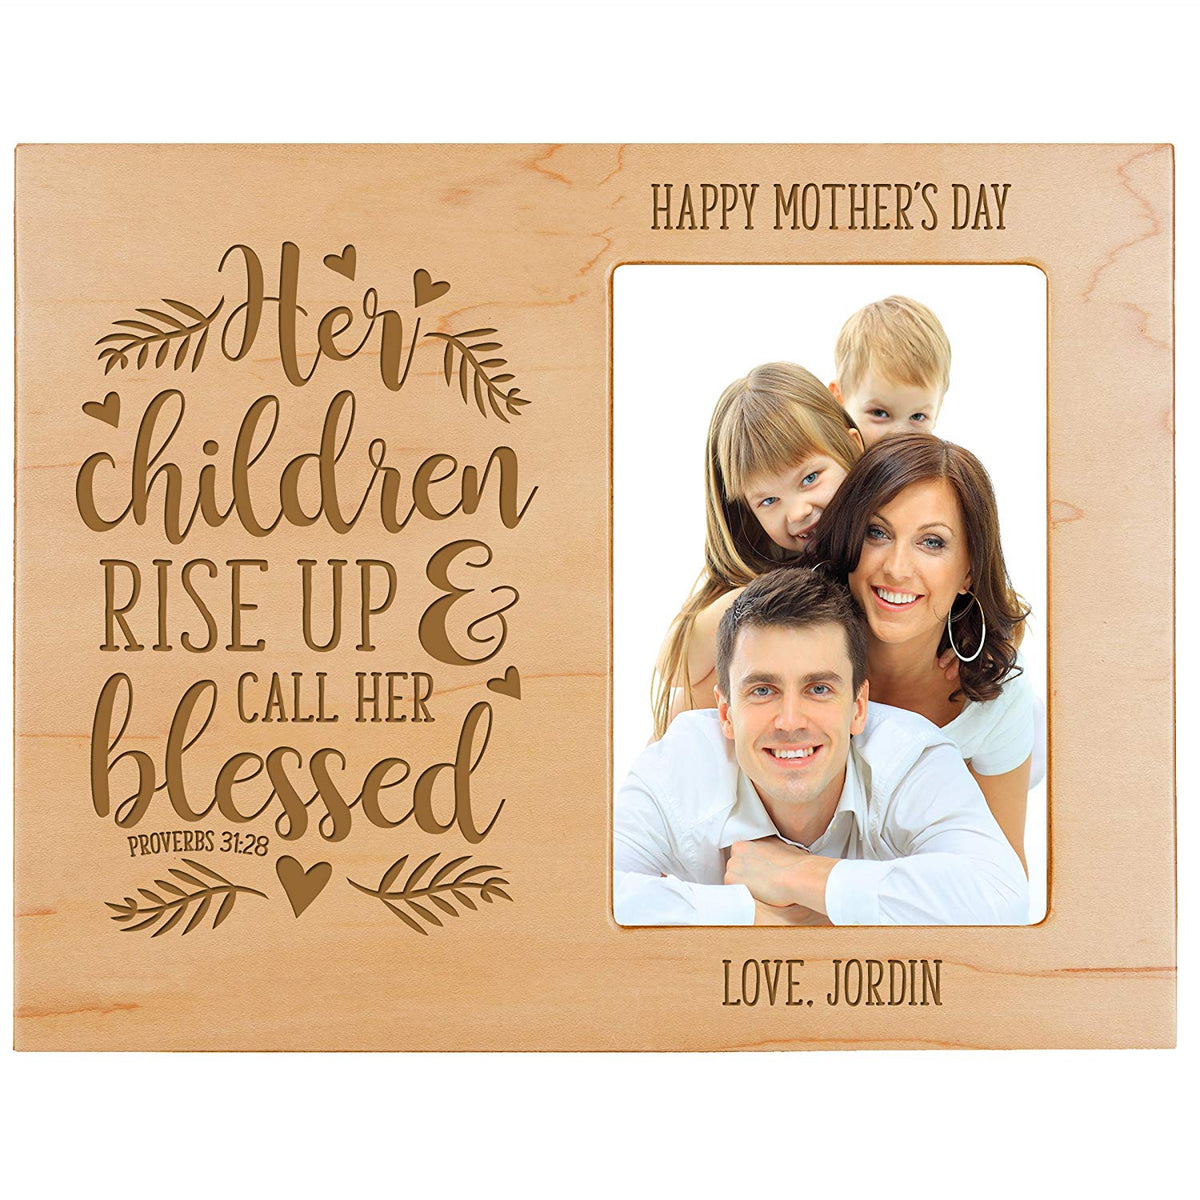 Personalized Happy Mother&#39;s Day Photo Frame - Her Children Rise Up - LifeSong Milestones